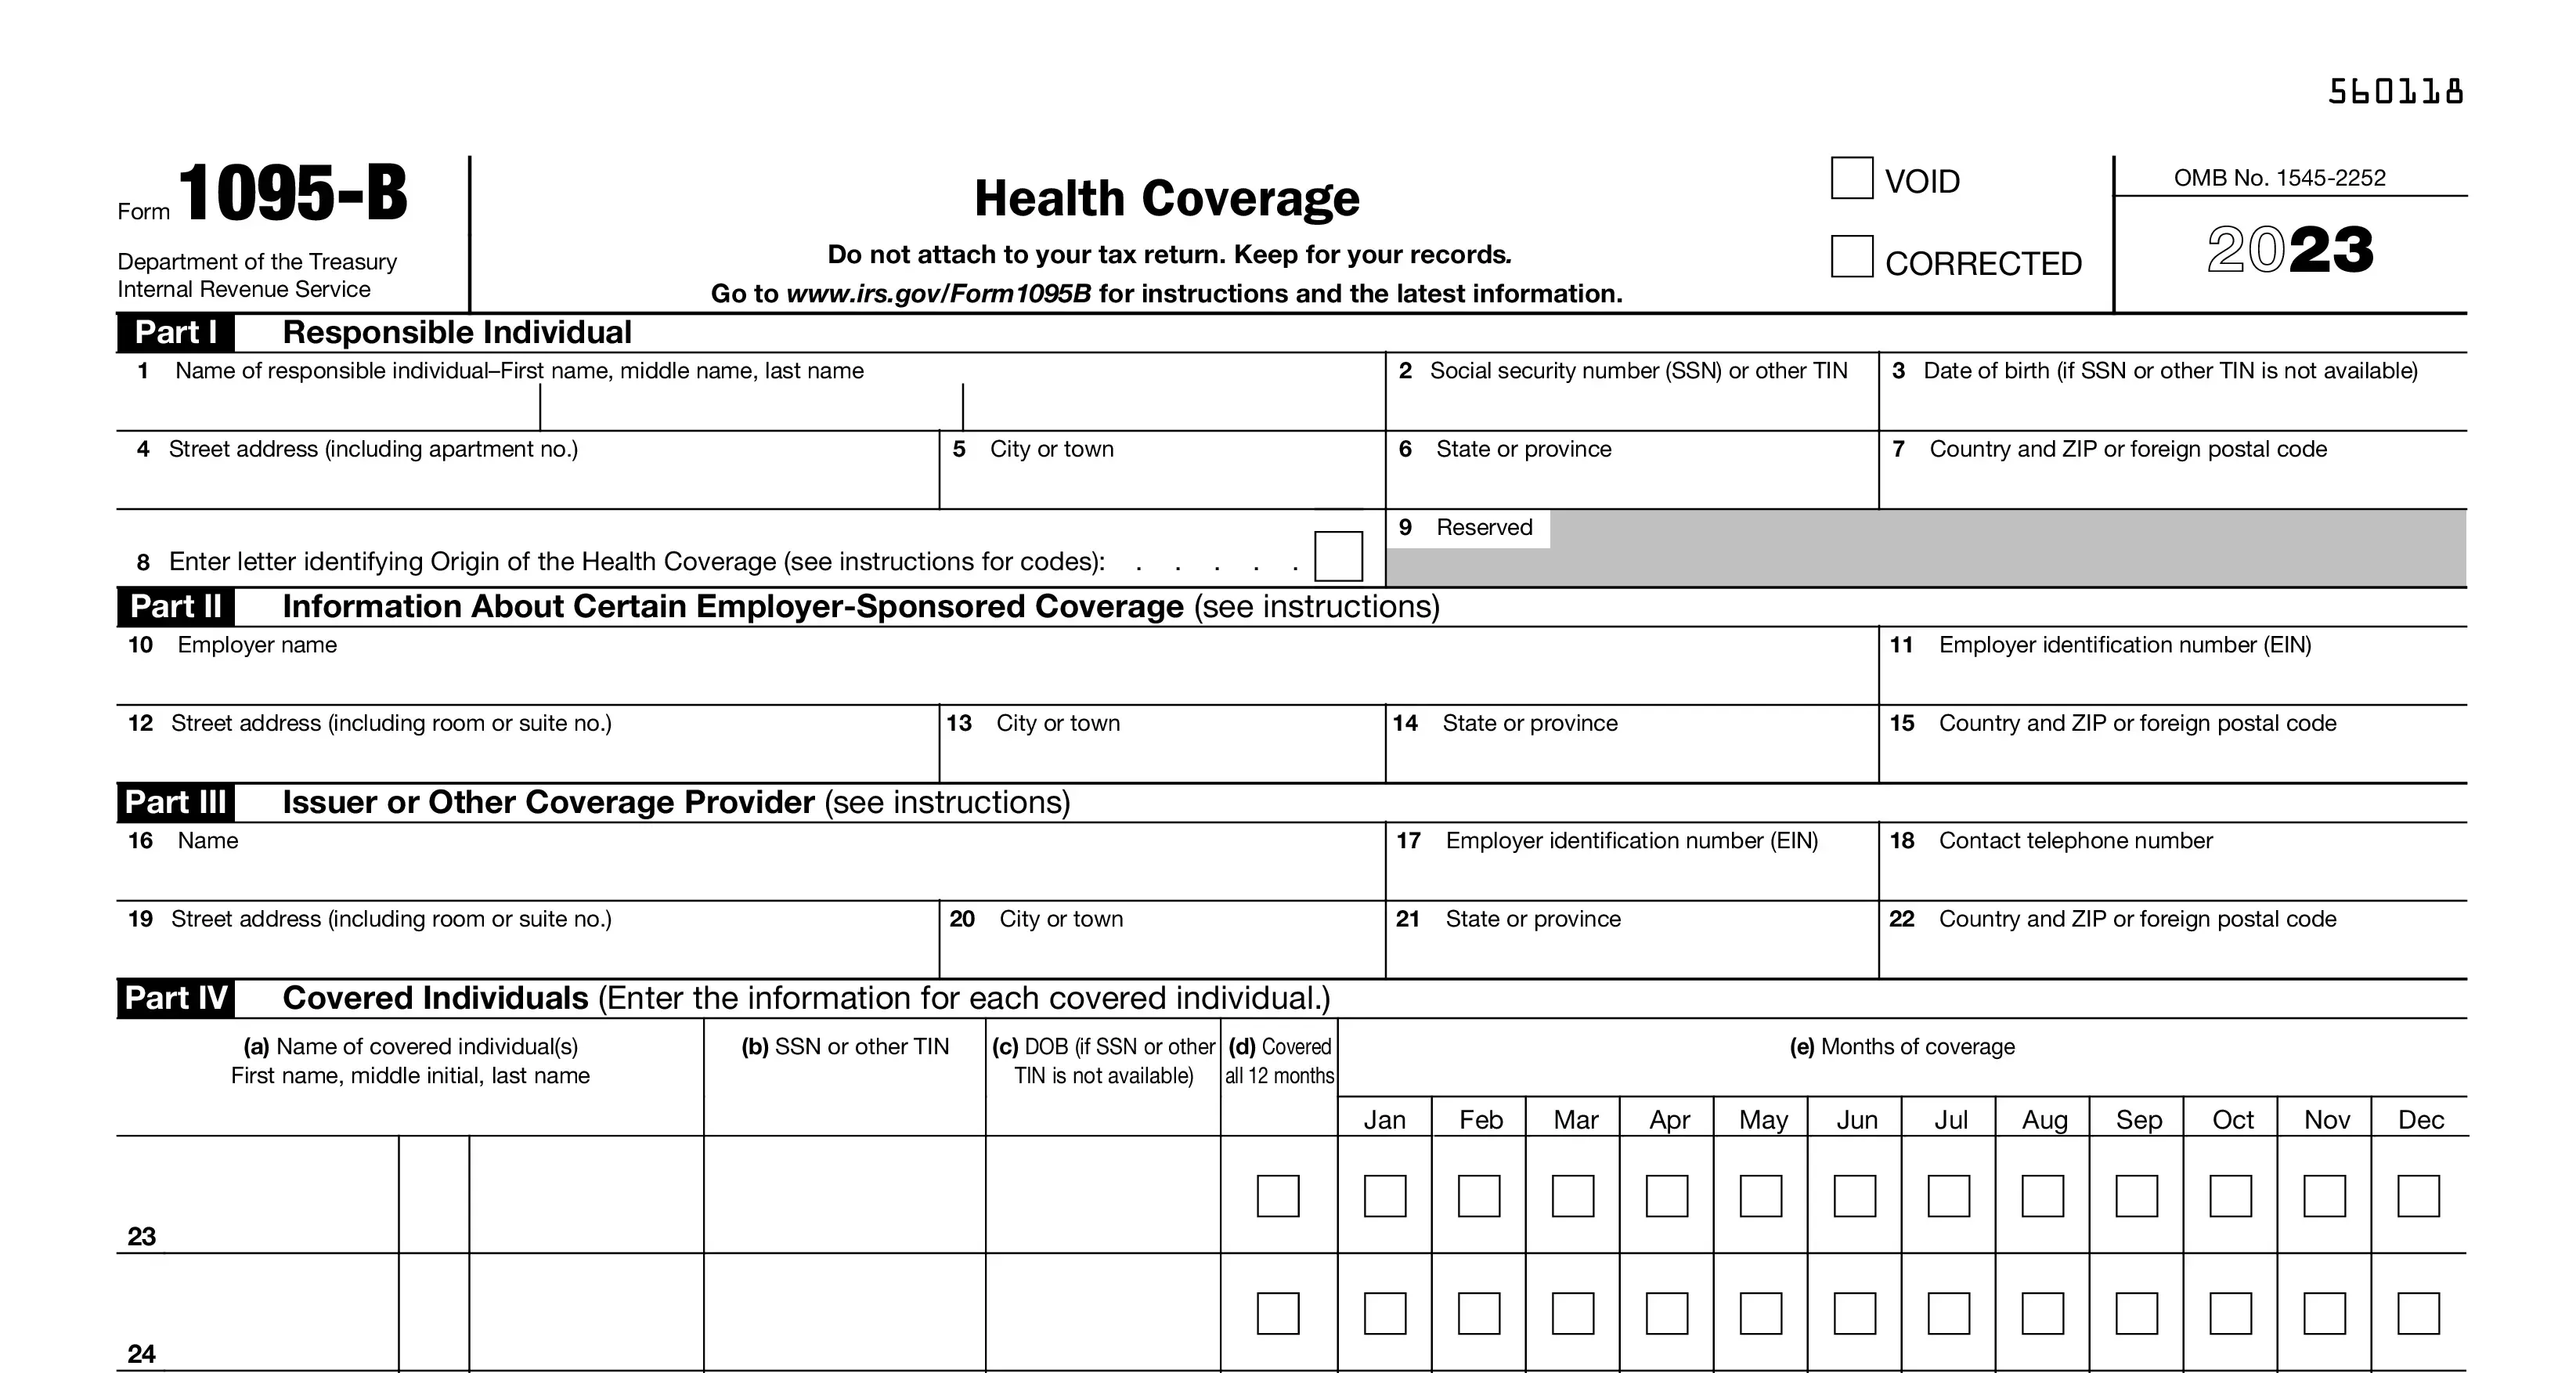 Form 1095-B for 2023 Tax Year